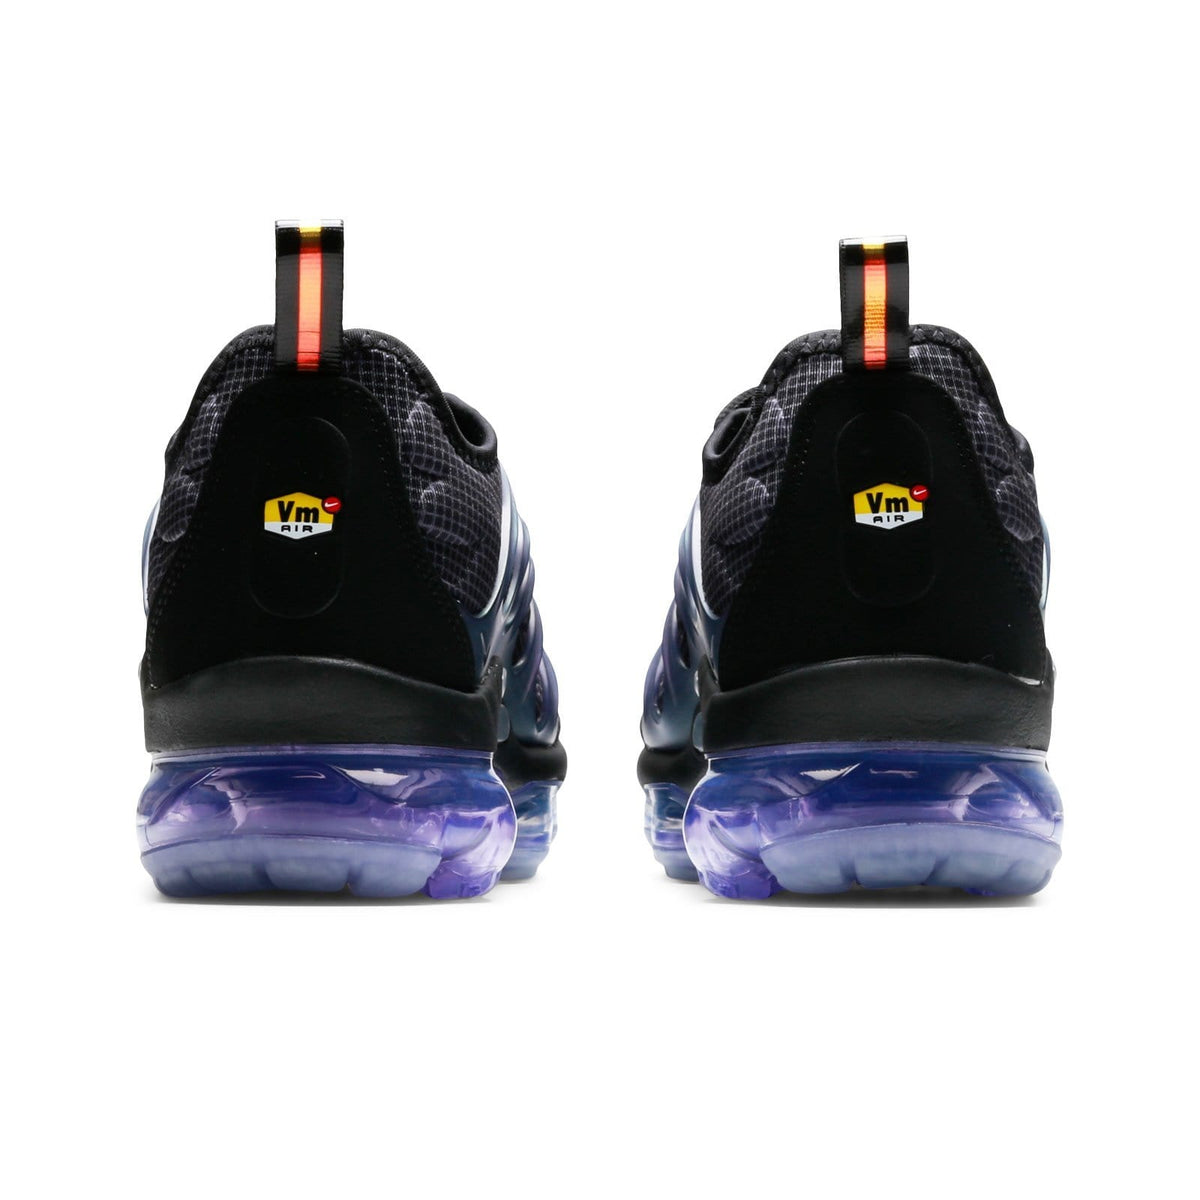 Nike Vapormax Plus Shoes For Sports and Fitness